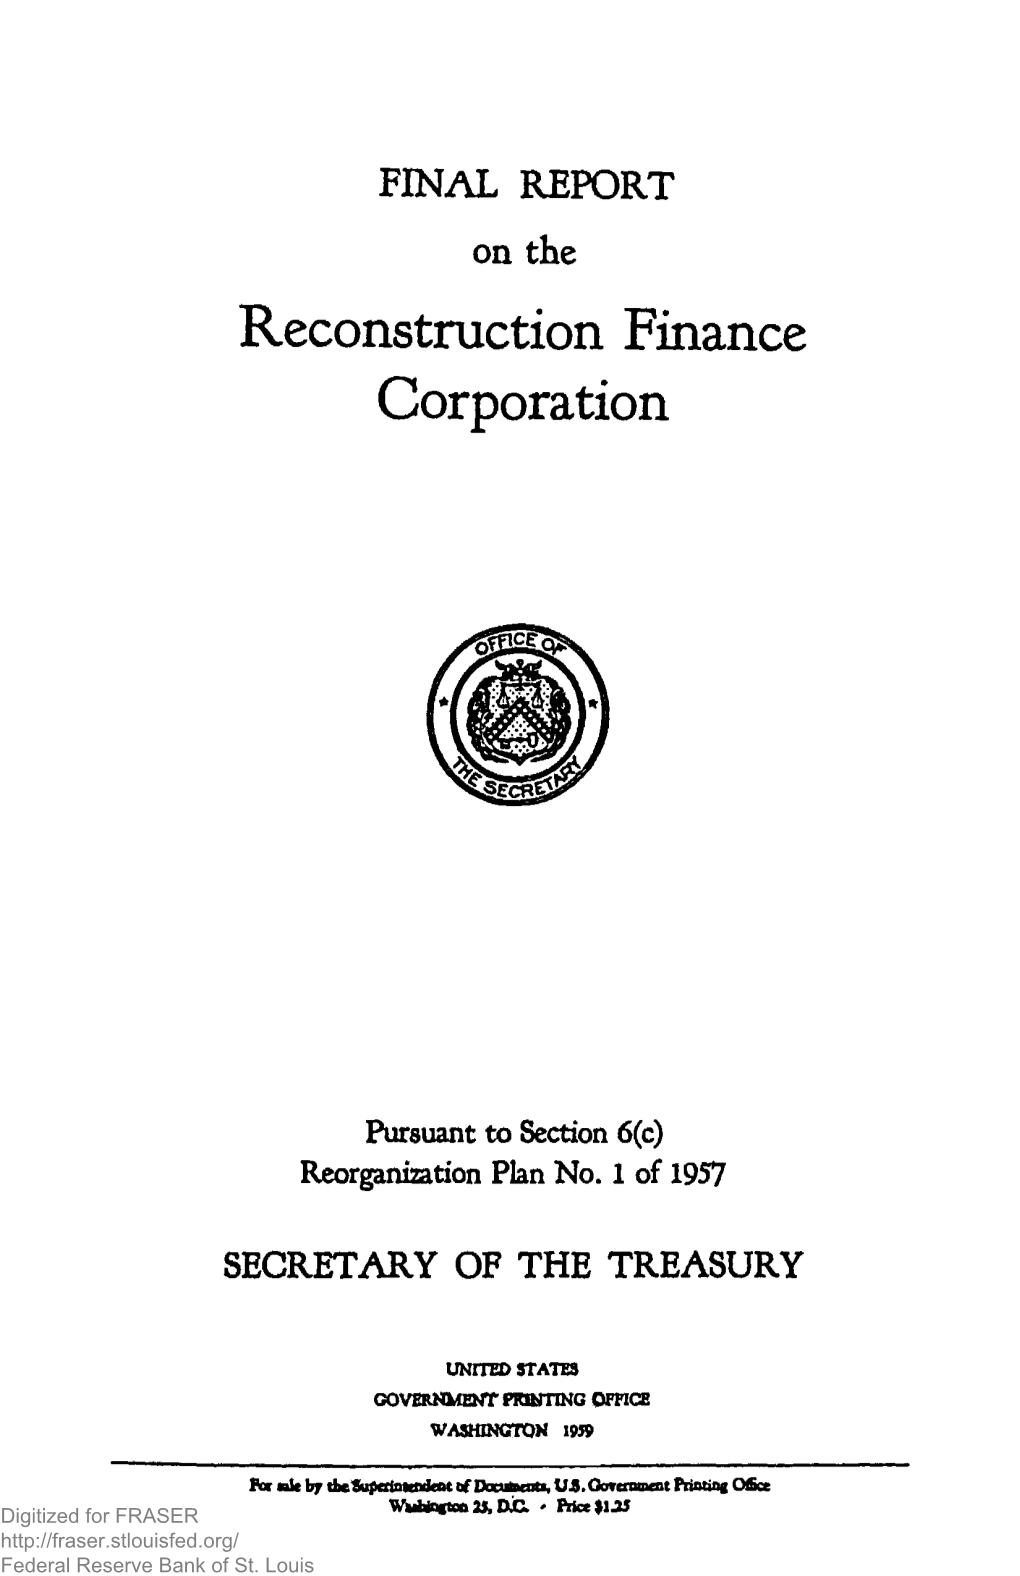 Final Report of the Reconstruction Finance Corporation